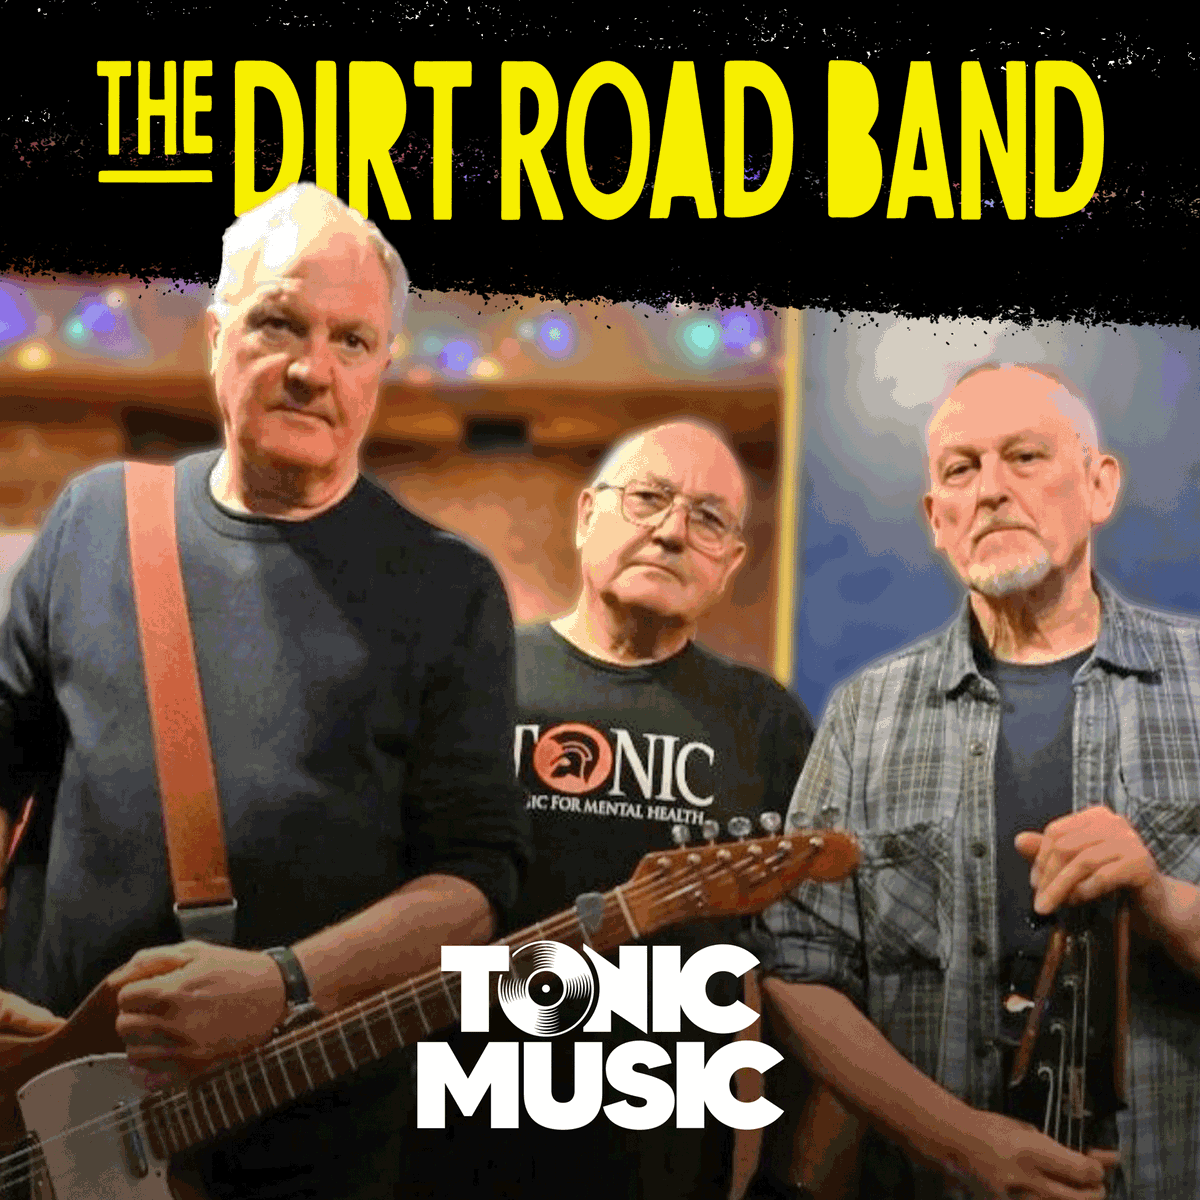 Big thanks Horace and the incredible Dirt Road Band for inviting us to have a Tonic Music stand at the Half Moon in Putney last night. So lovely to catch up with everyone.❤️ @BluesDirt @horacepanterart @HalfmoonPutney #MentalHealth #Music #Tonic #NeverMindTheStigma #Wellbeing